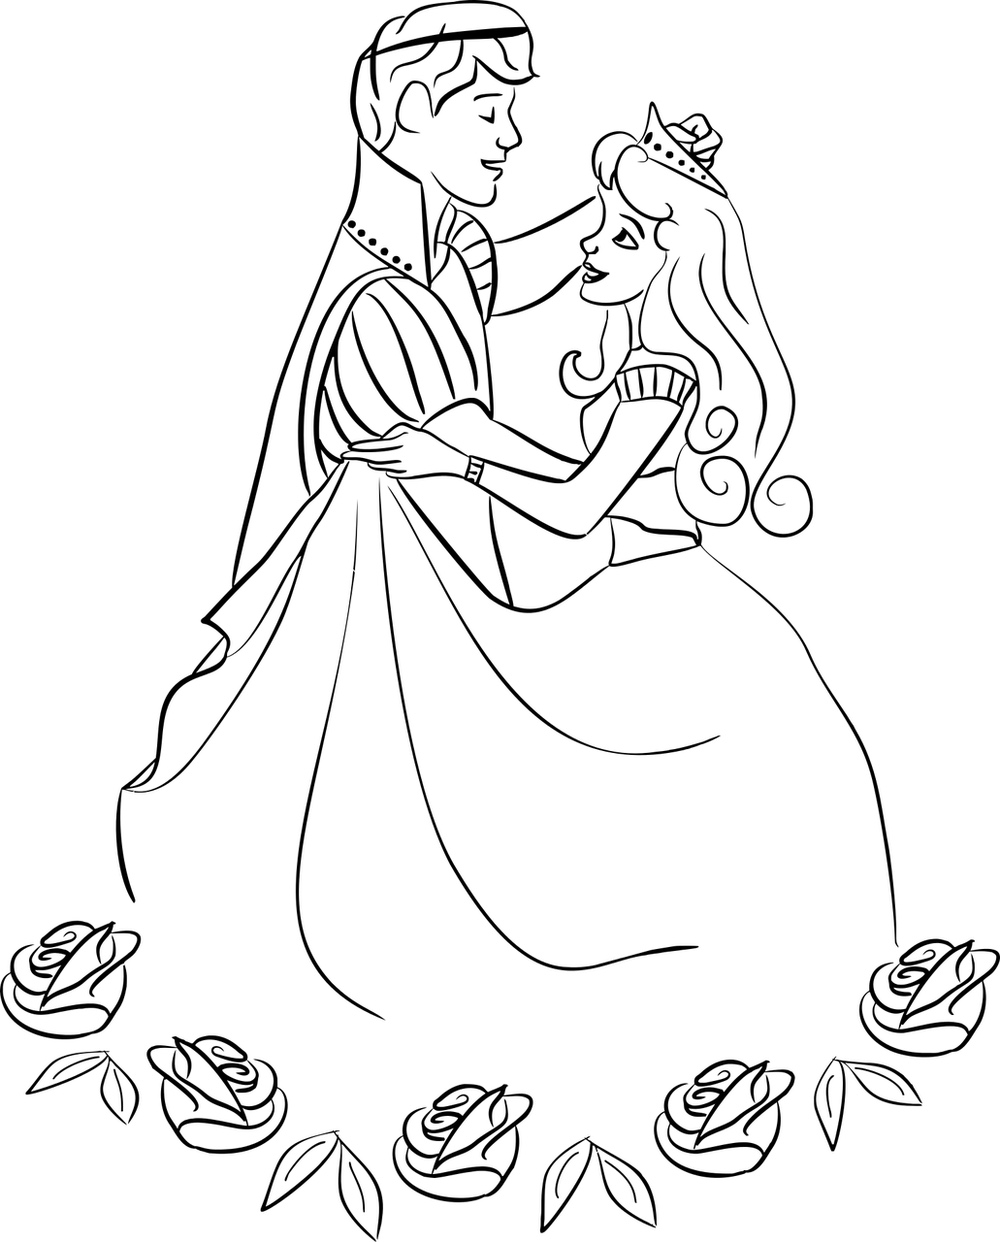 Prince and a Princess Fairy Tale Coloring Page